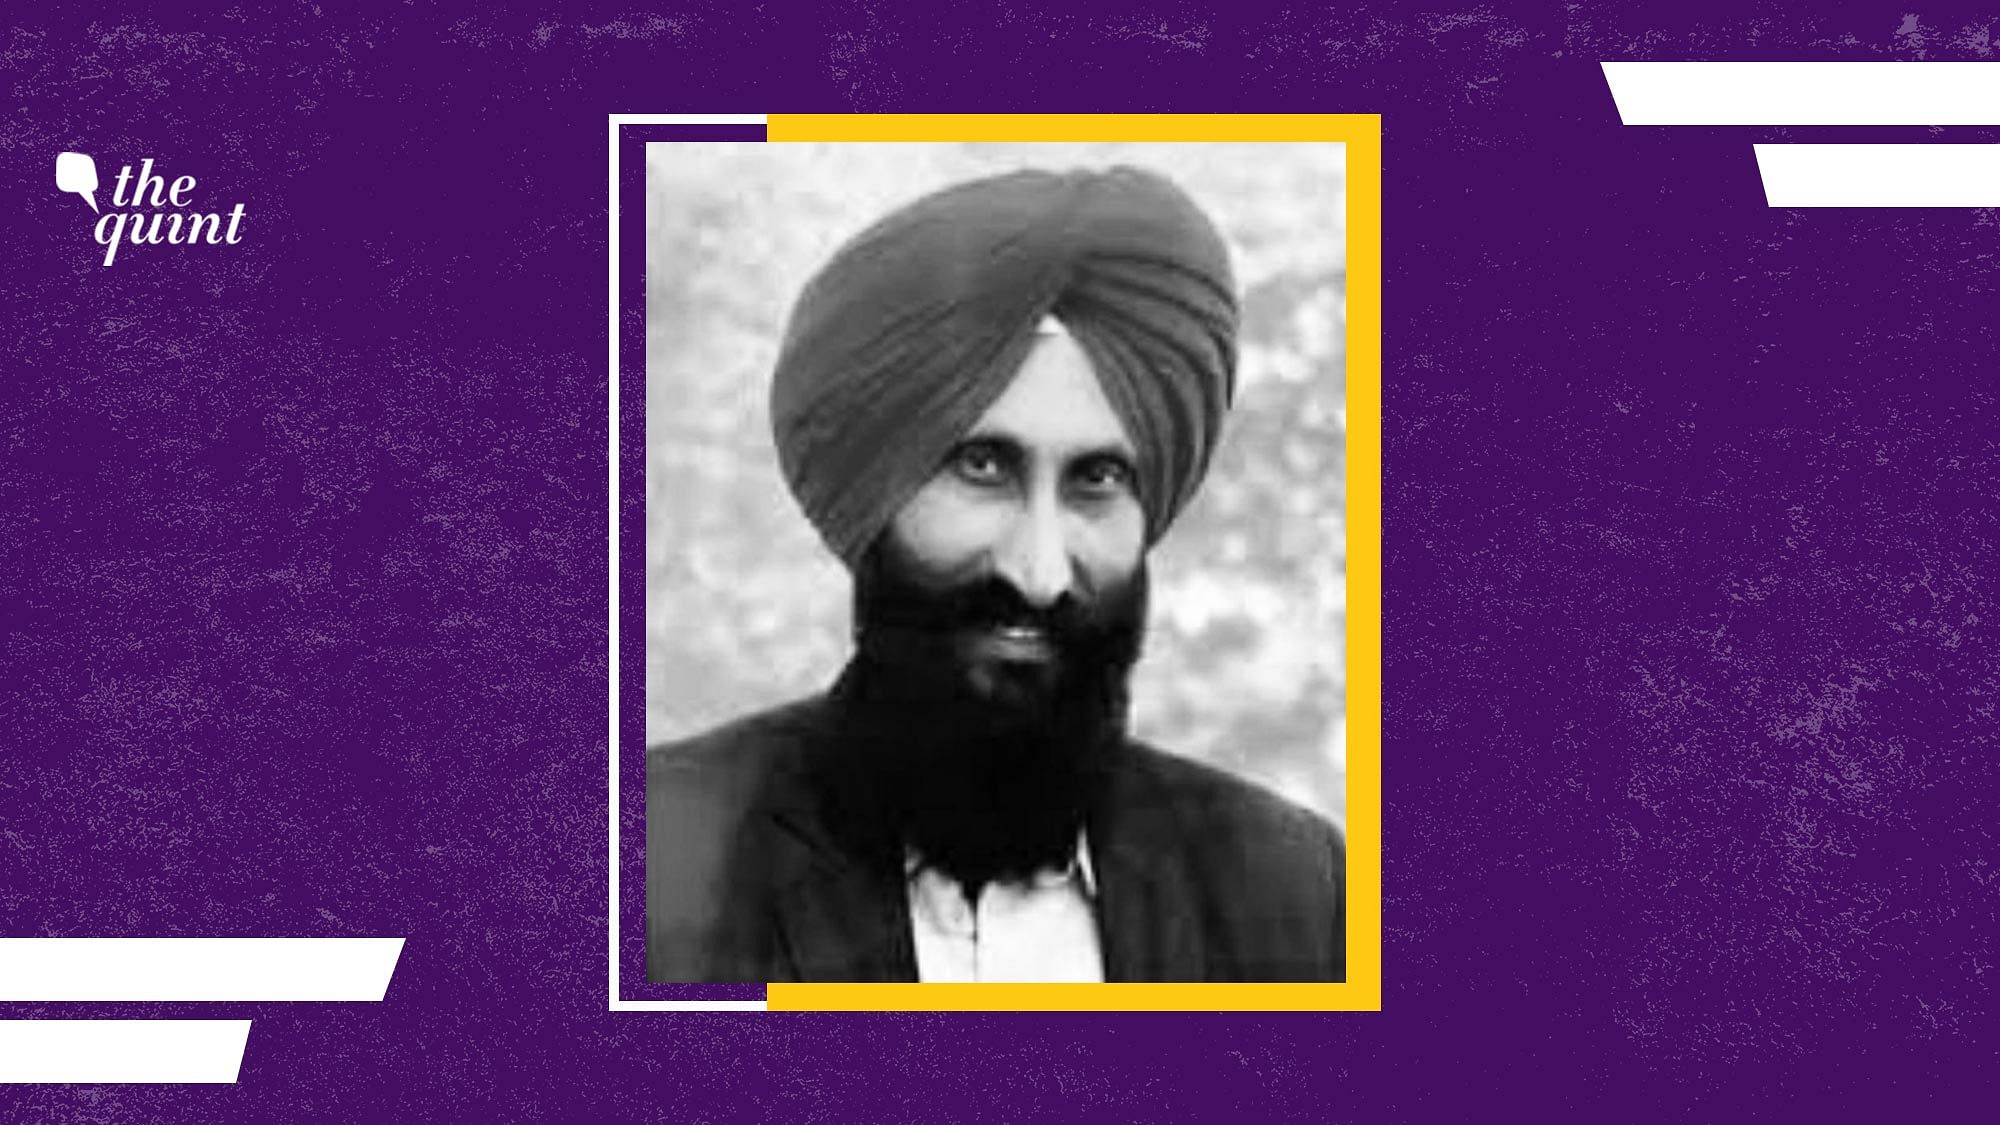 Balwinder Singh was known to have stood up against terrorism and survived multiple attempts by militants.